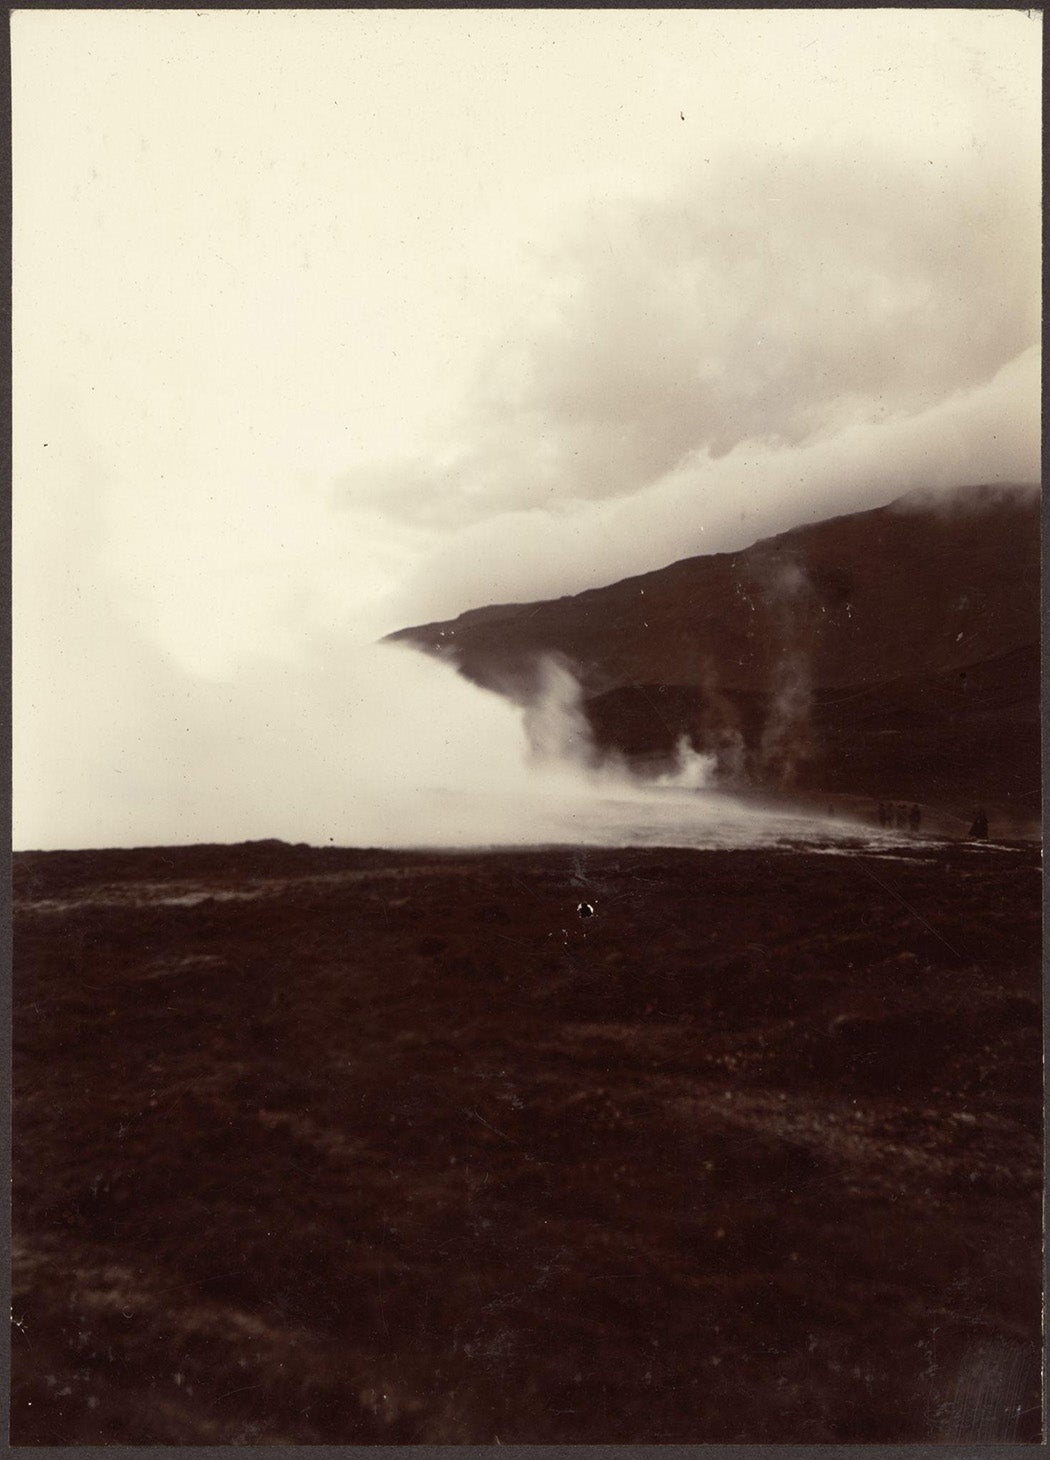 People watching an erupting geyser. Water and stream rising in the air, mountains in background.